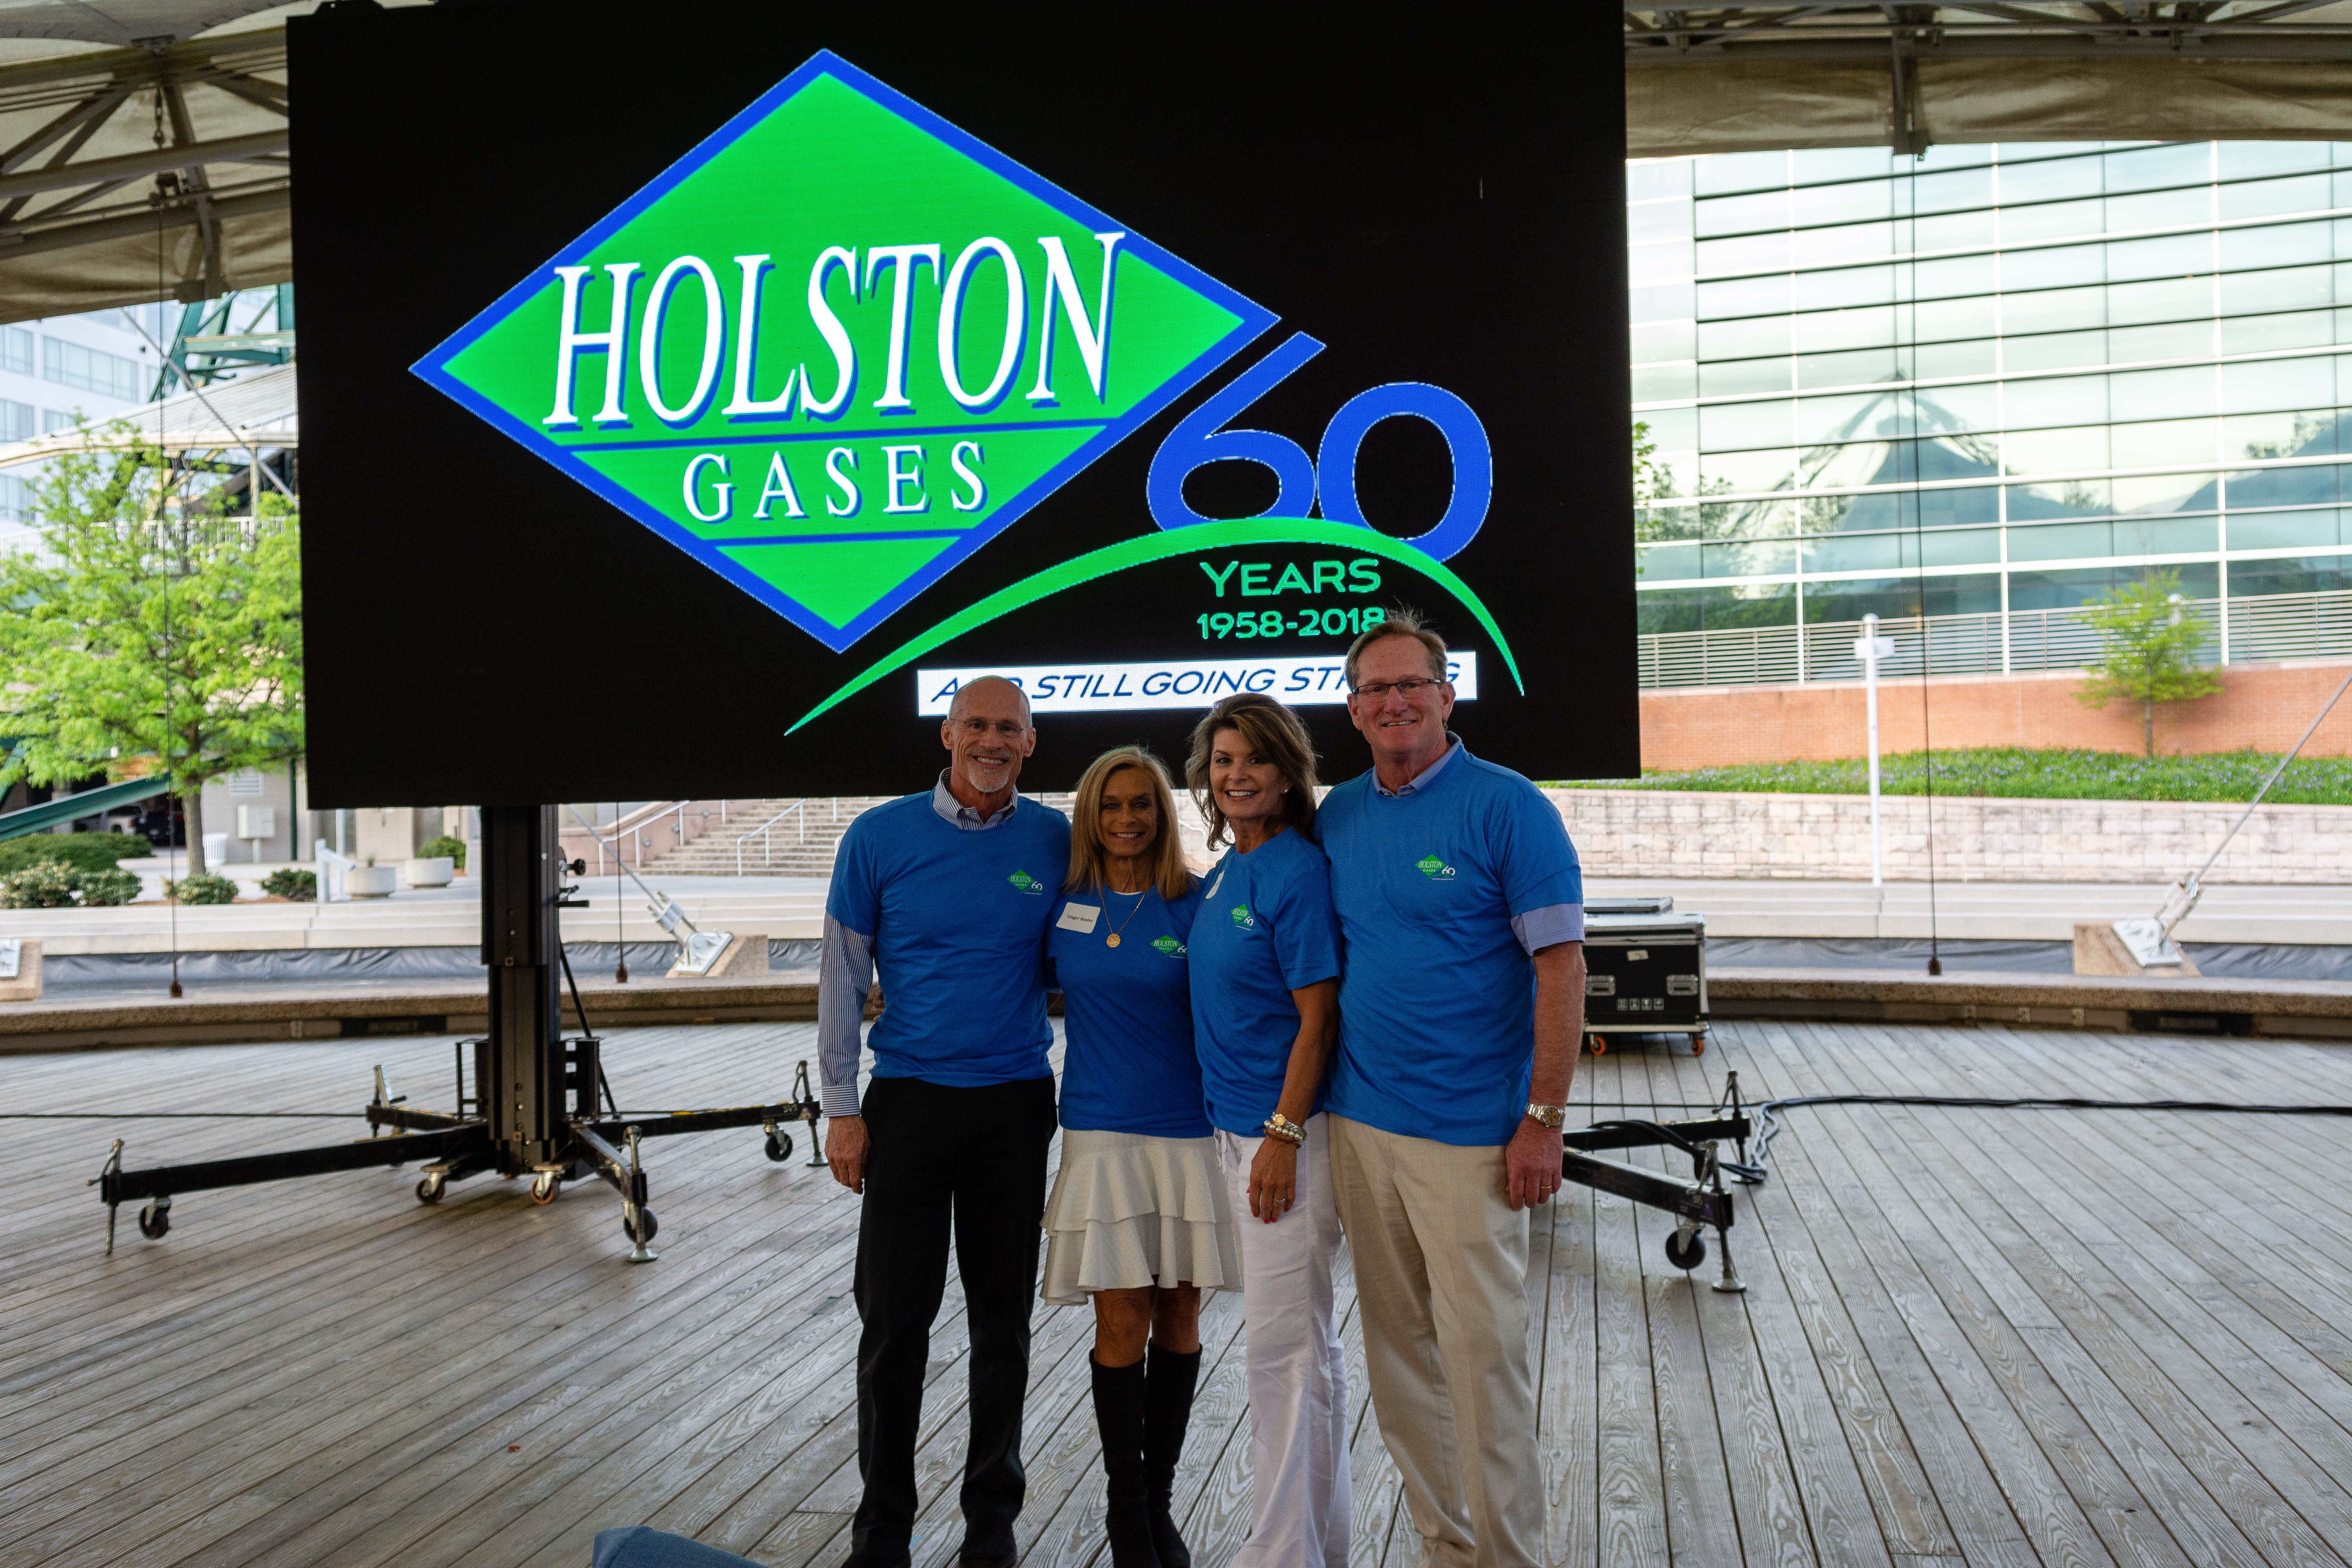 Holston Gases_l-r, Bill Baxter, Ginger Baxter, Missy Anders, Robert Anders